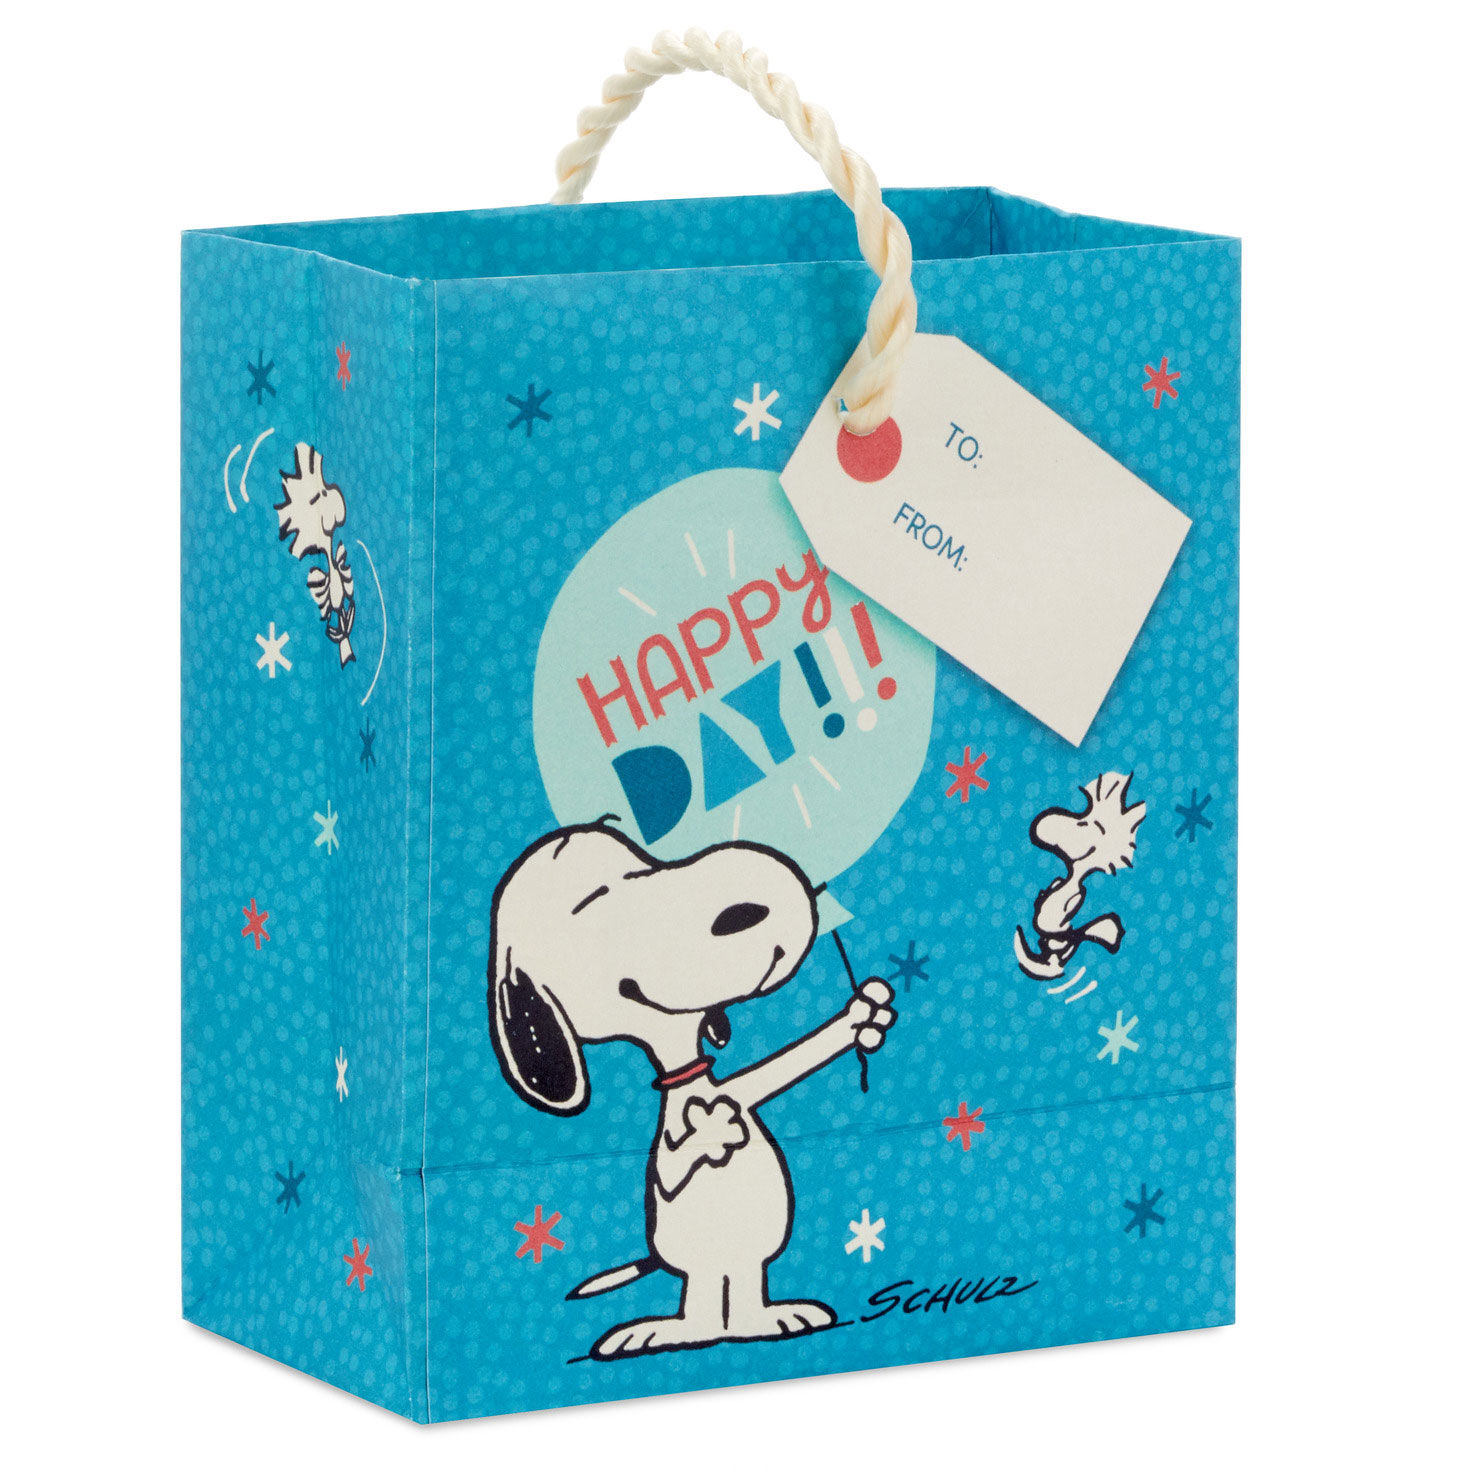 4.6" Peanuts® Snoopy With Balloon Gift Card Holder Mini Bag for only USD 2.49 | Hallmark